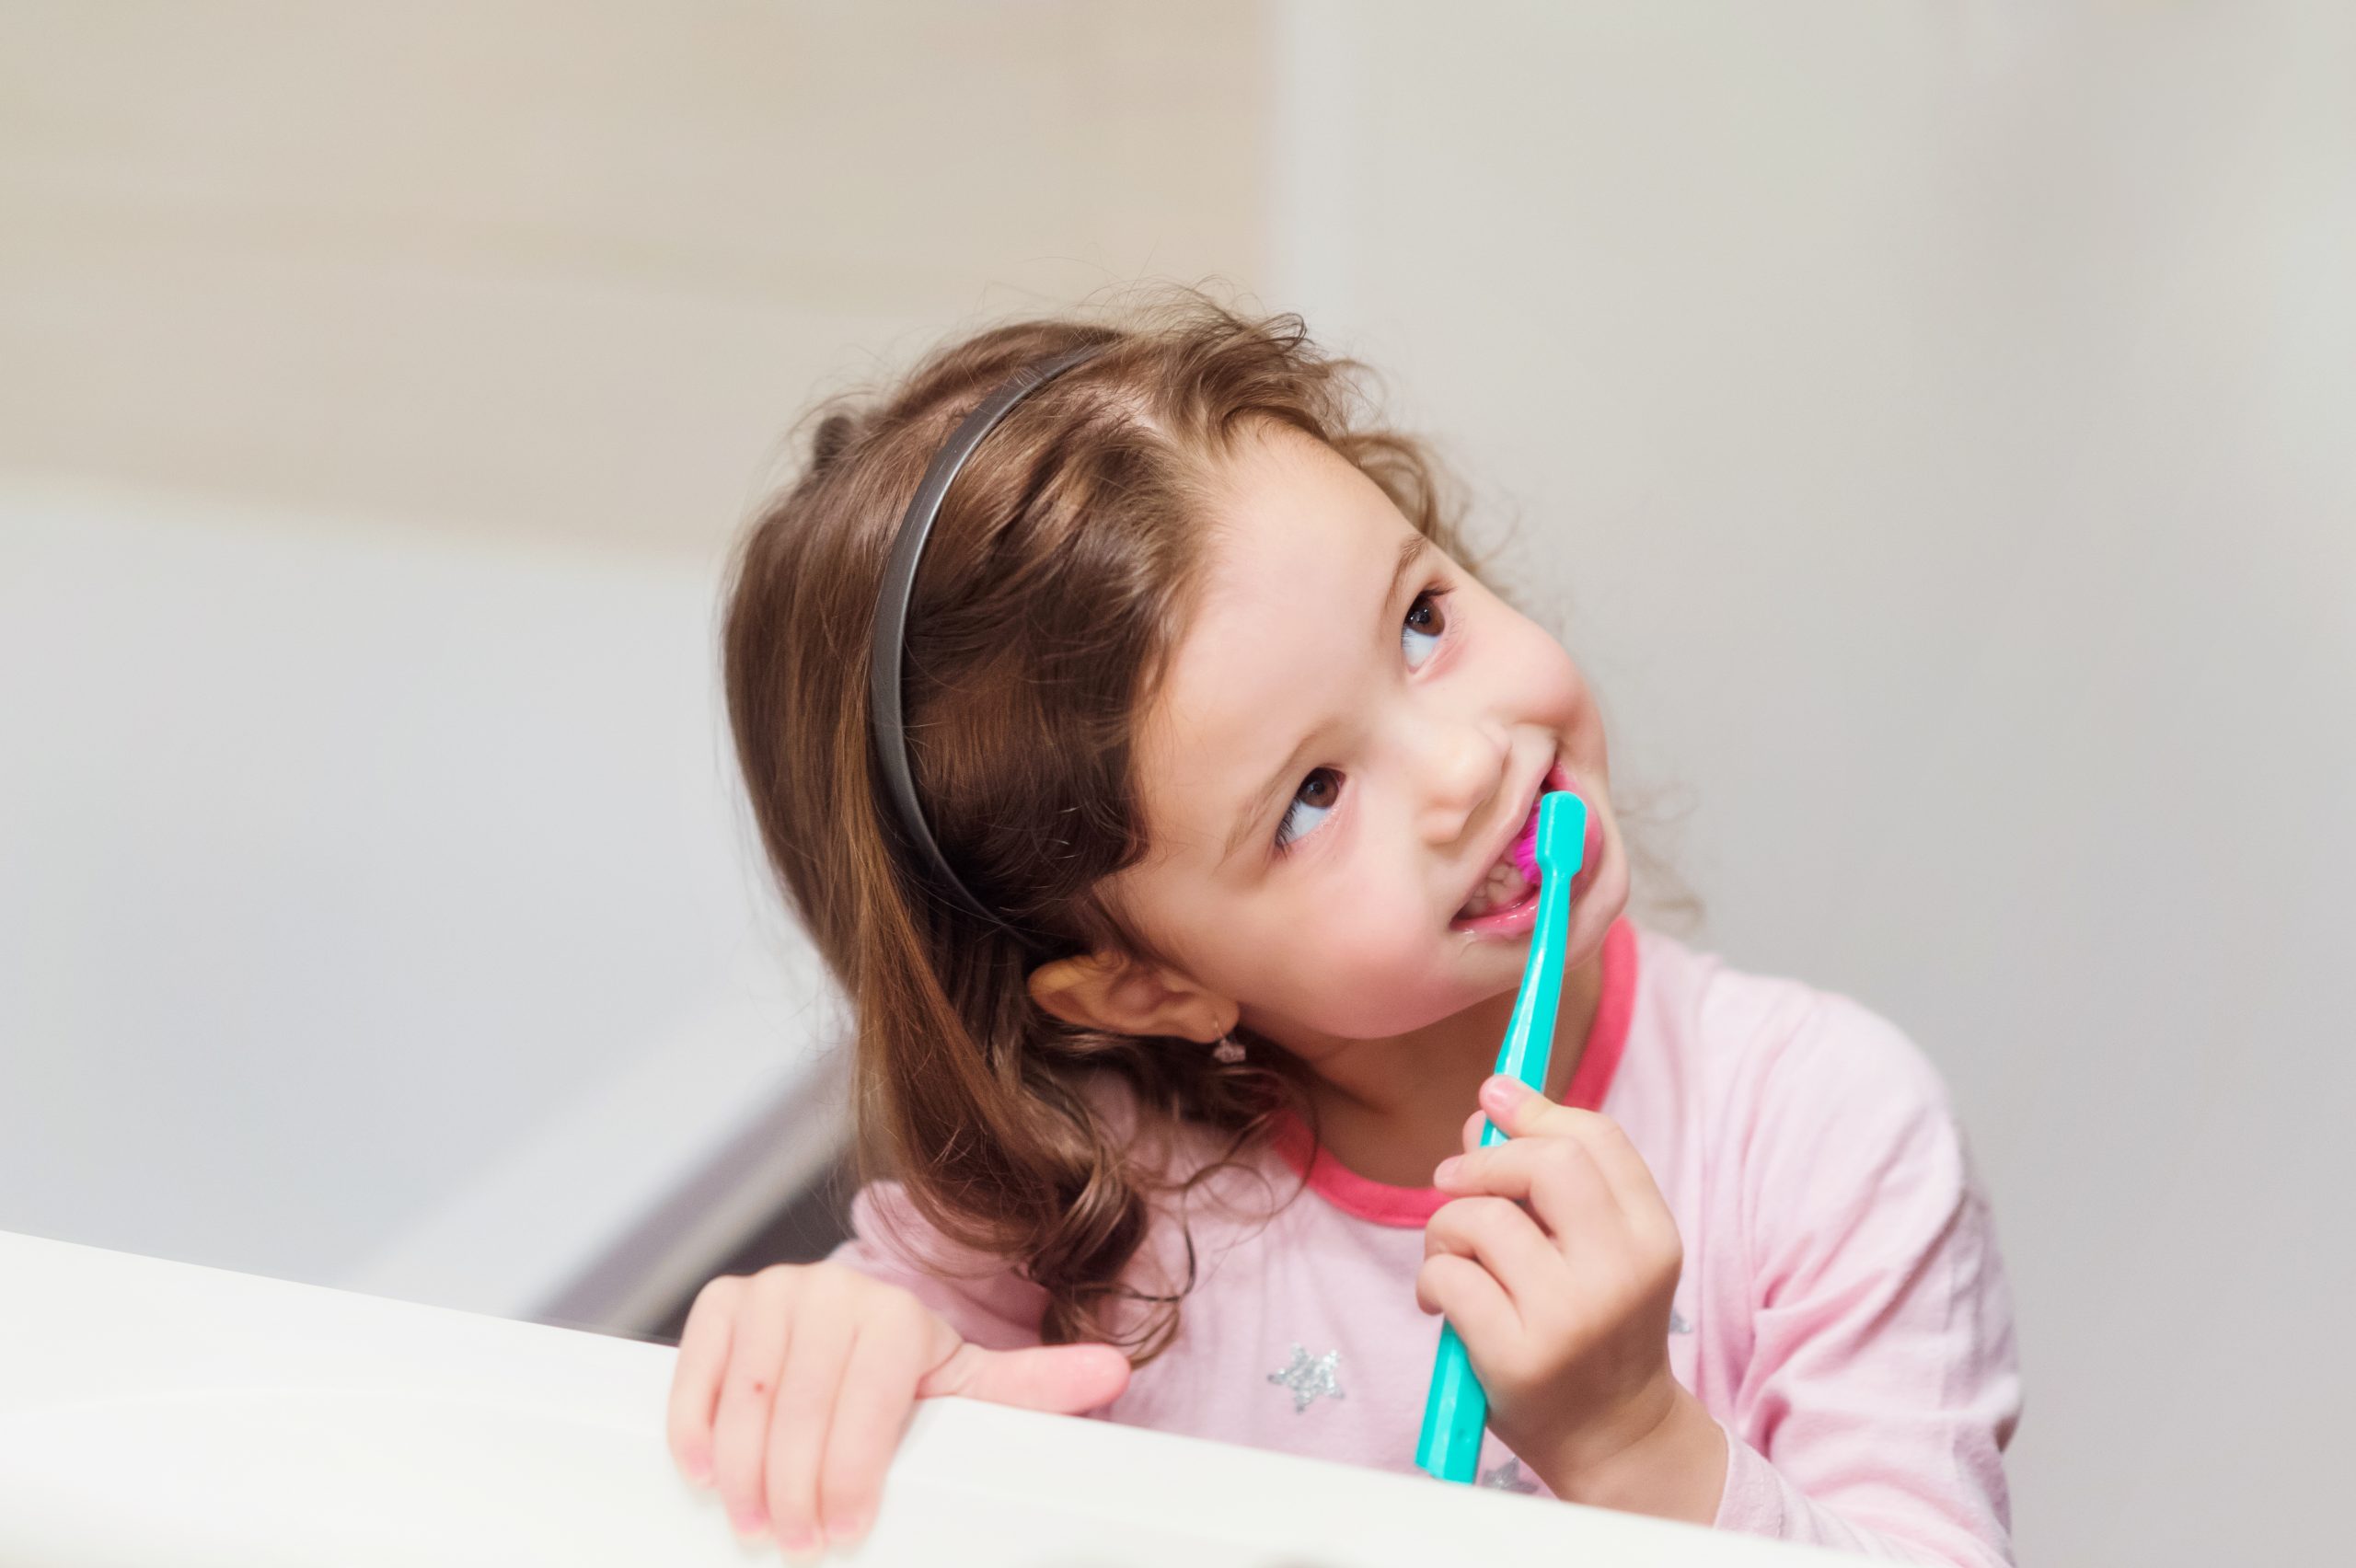 A Parents Guide to Preventing Common Oral Health Issues for Your Child